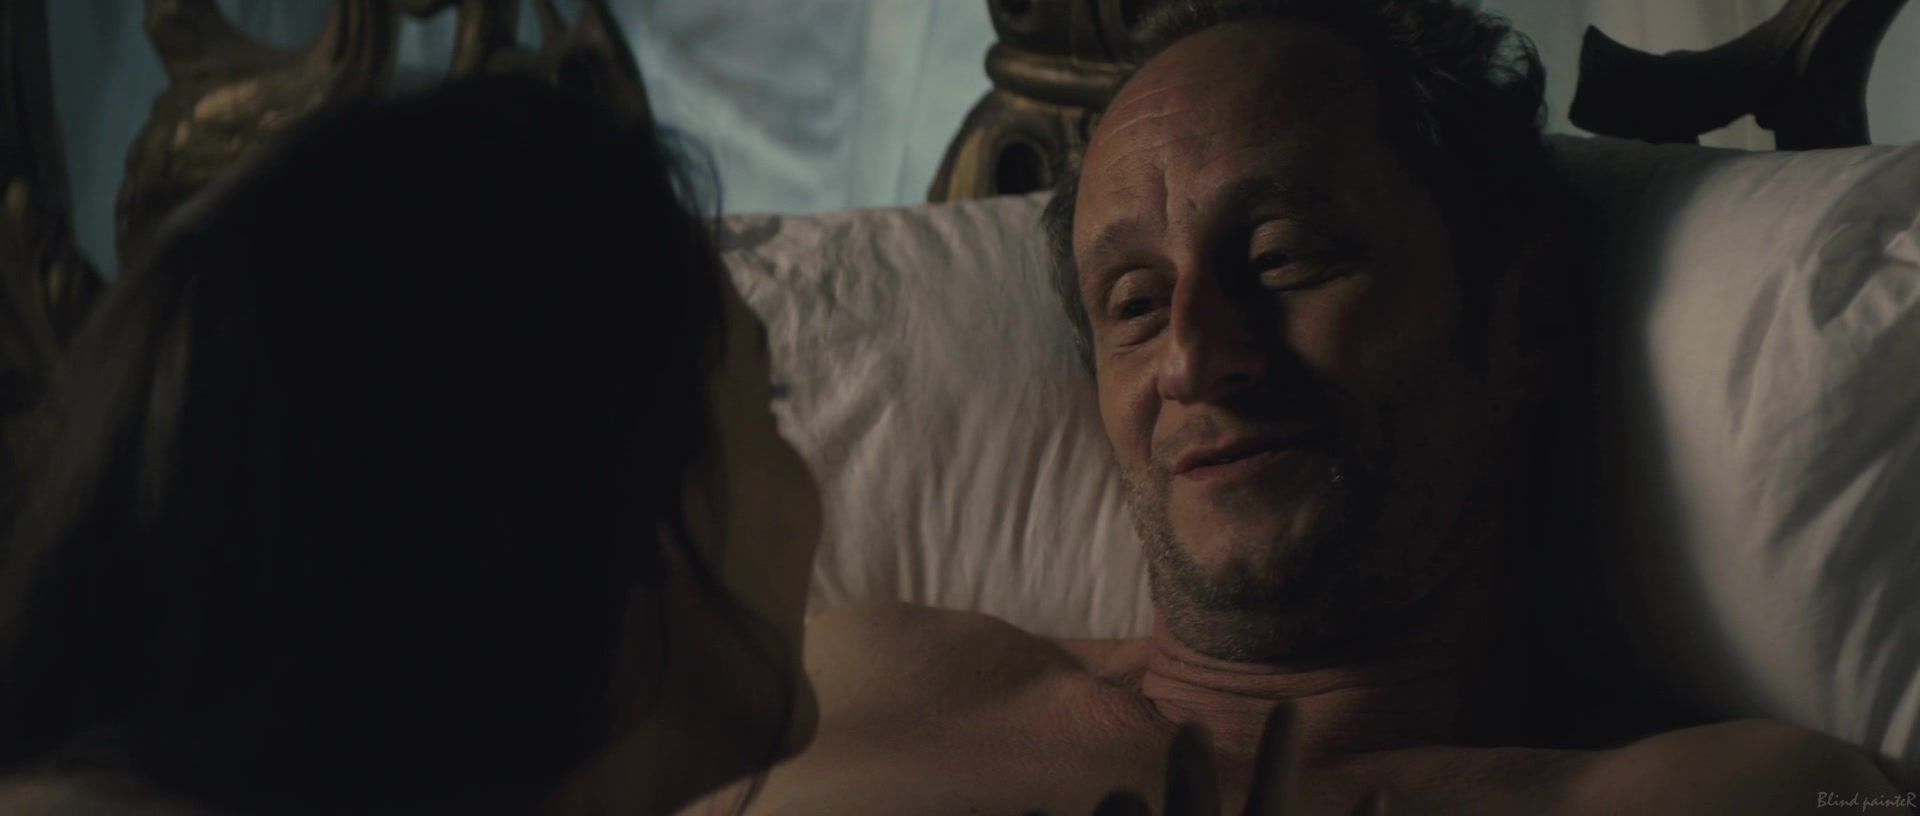 OnOff French sex scene | Charlotte Le Bon nude - Le Grand Mechant Loup (2013) Sixtynine